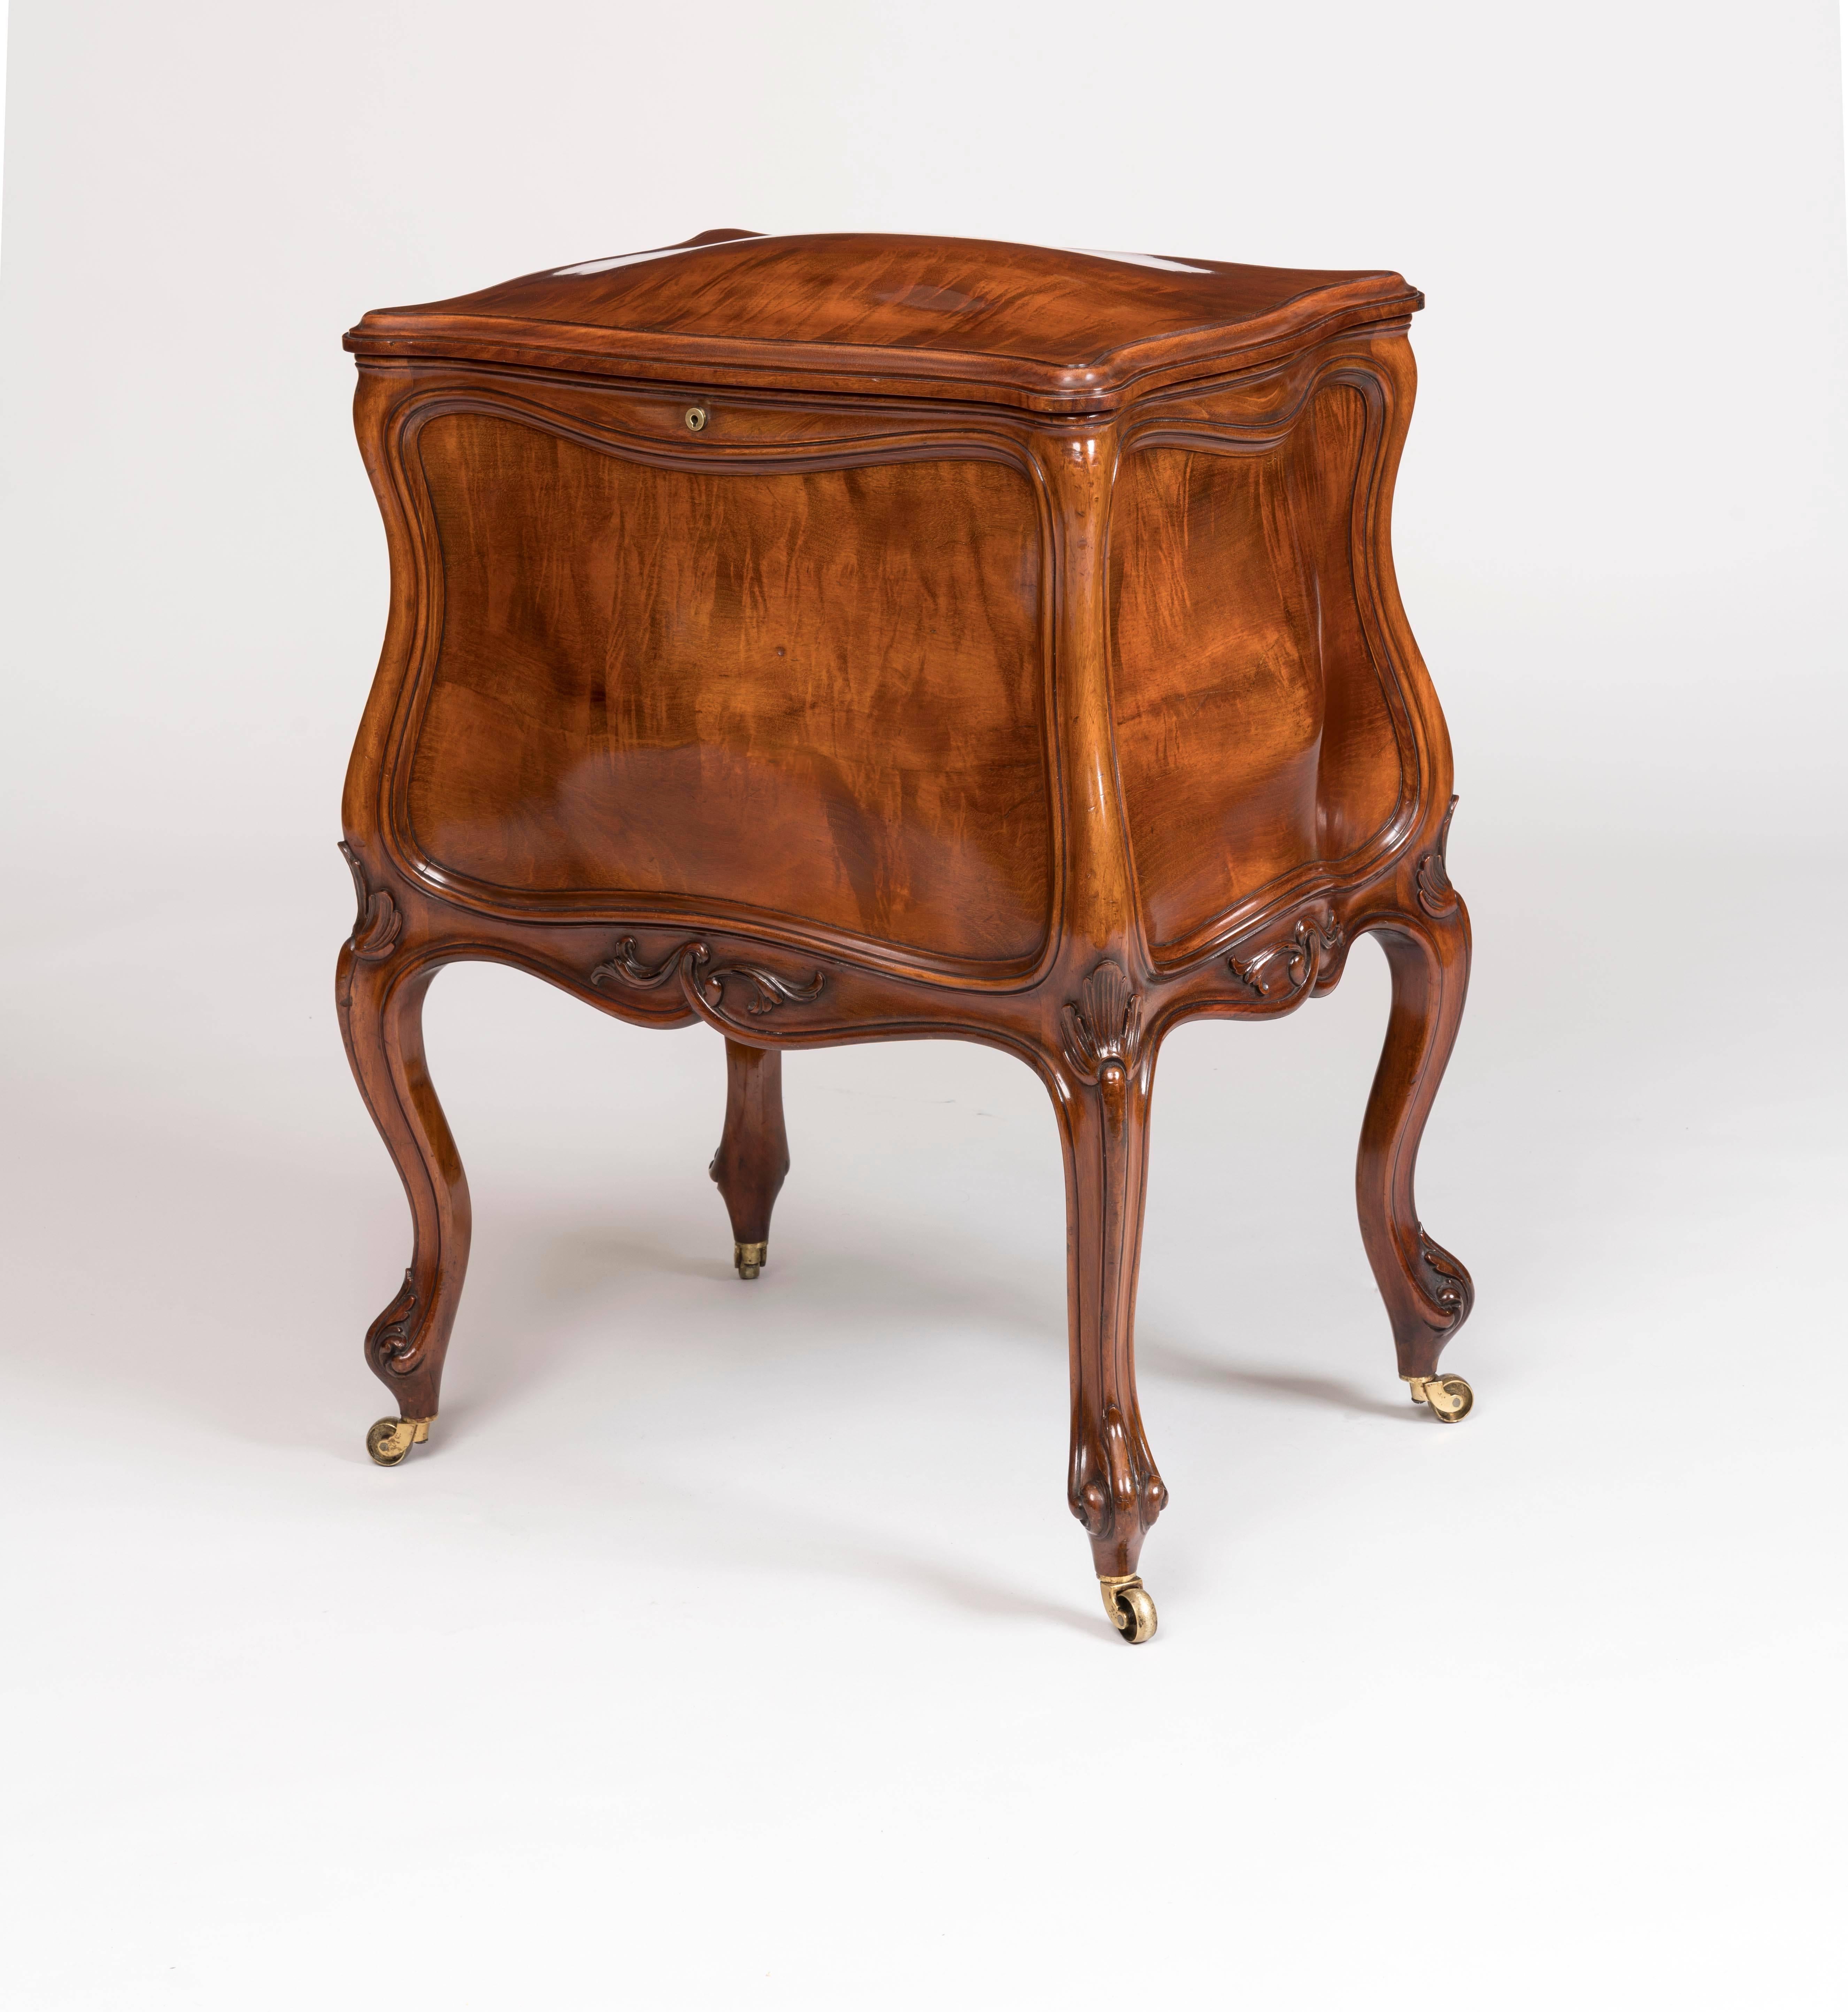 Victorian 19th Century English Mahogany Bombé Shape Wine Cooler by Holland & Sons For Sale